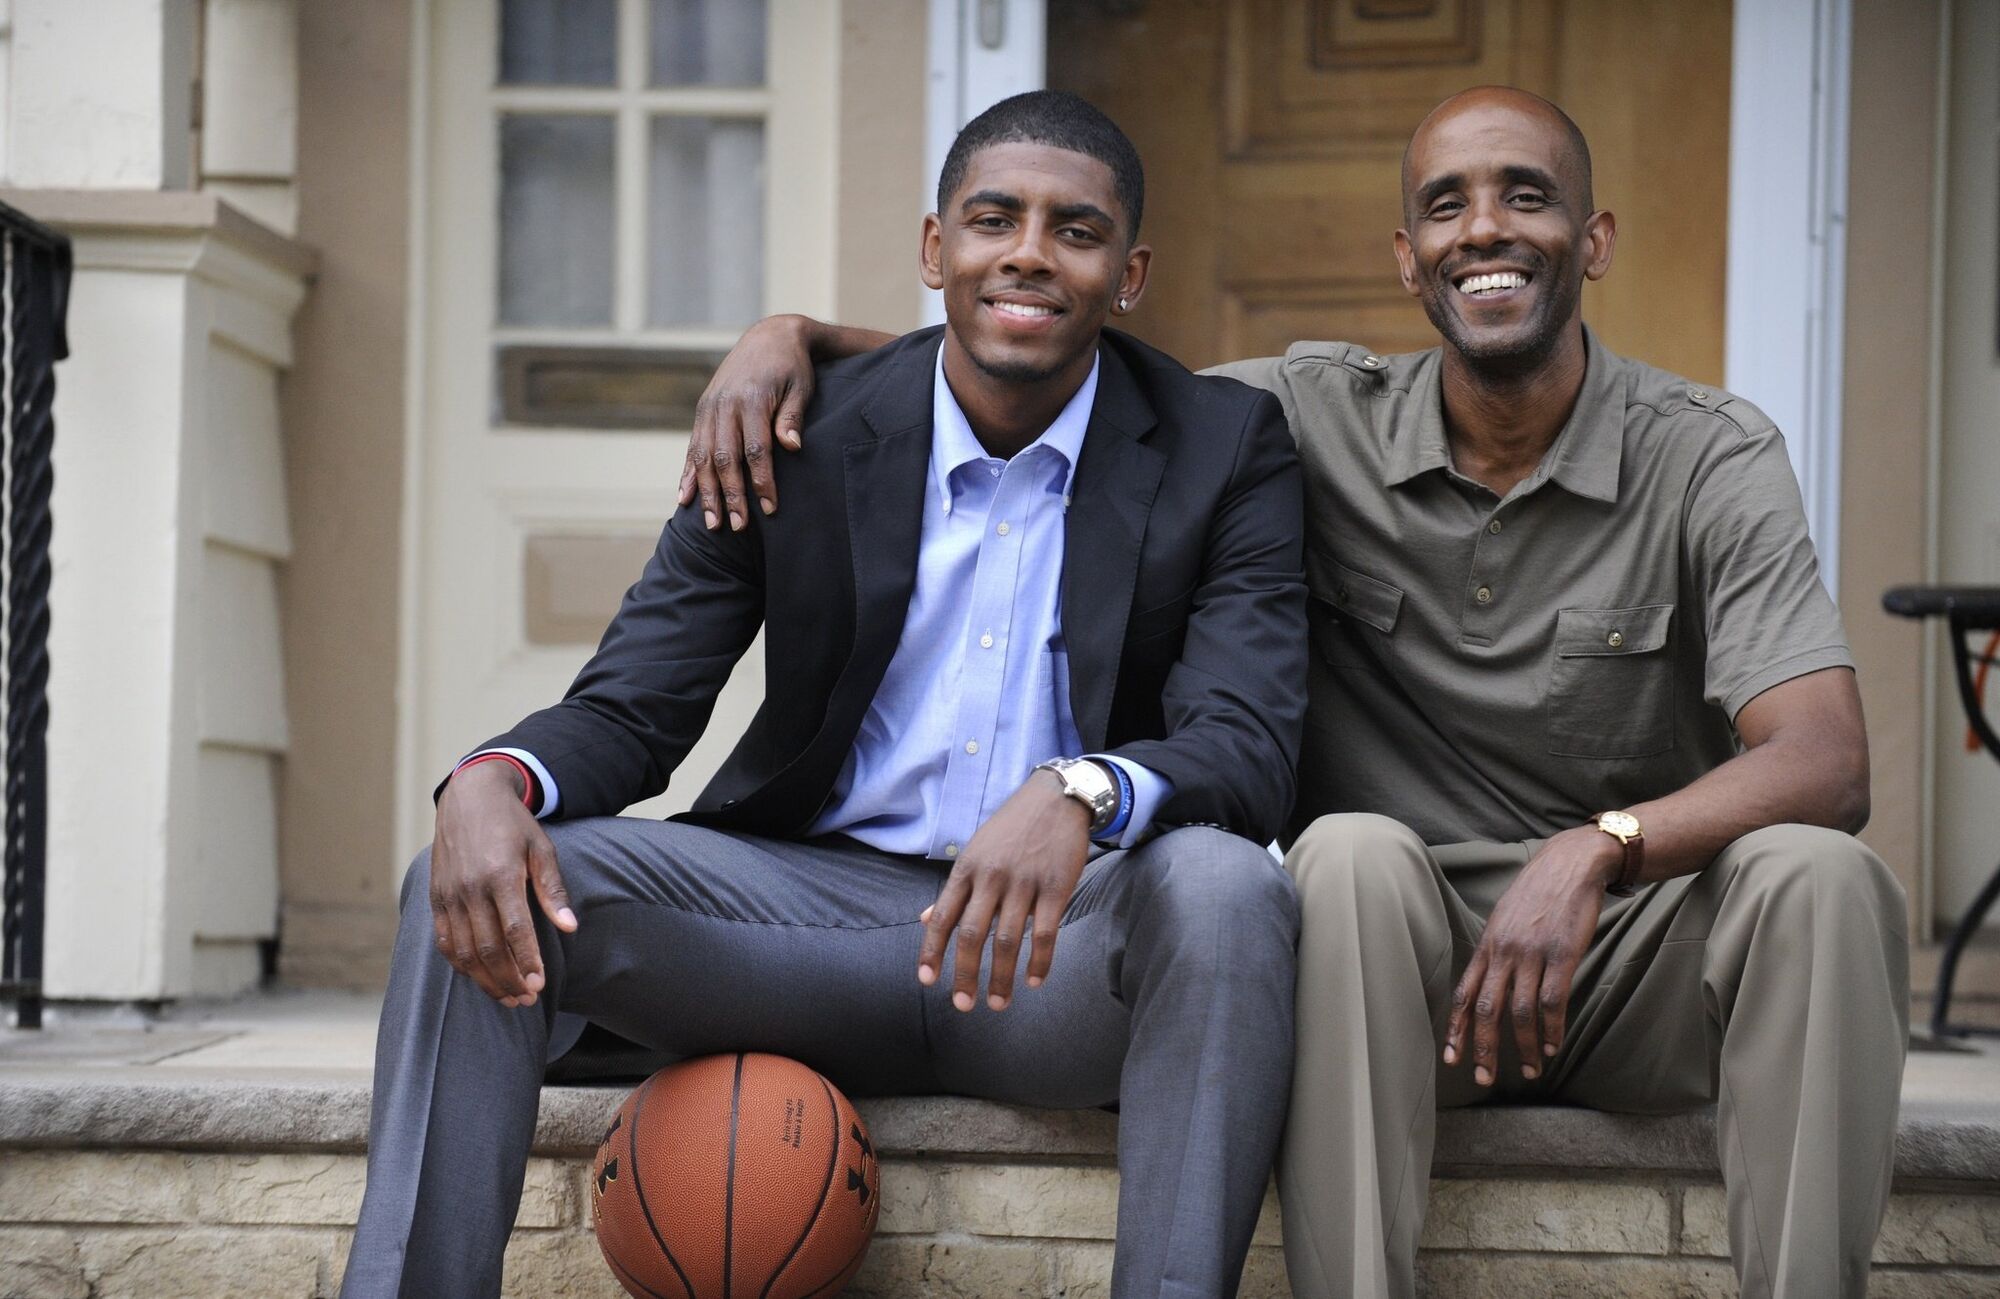 Gallery:Irving Family | Nbafamily Wiki | FANDOM powered by Wikia2000 x 1299